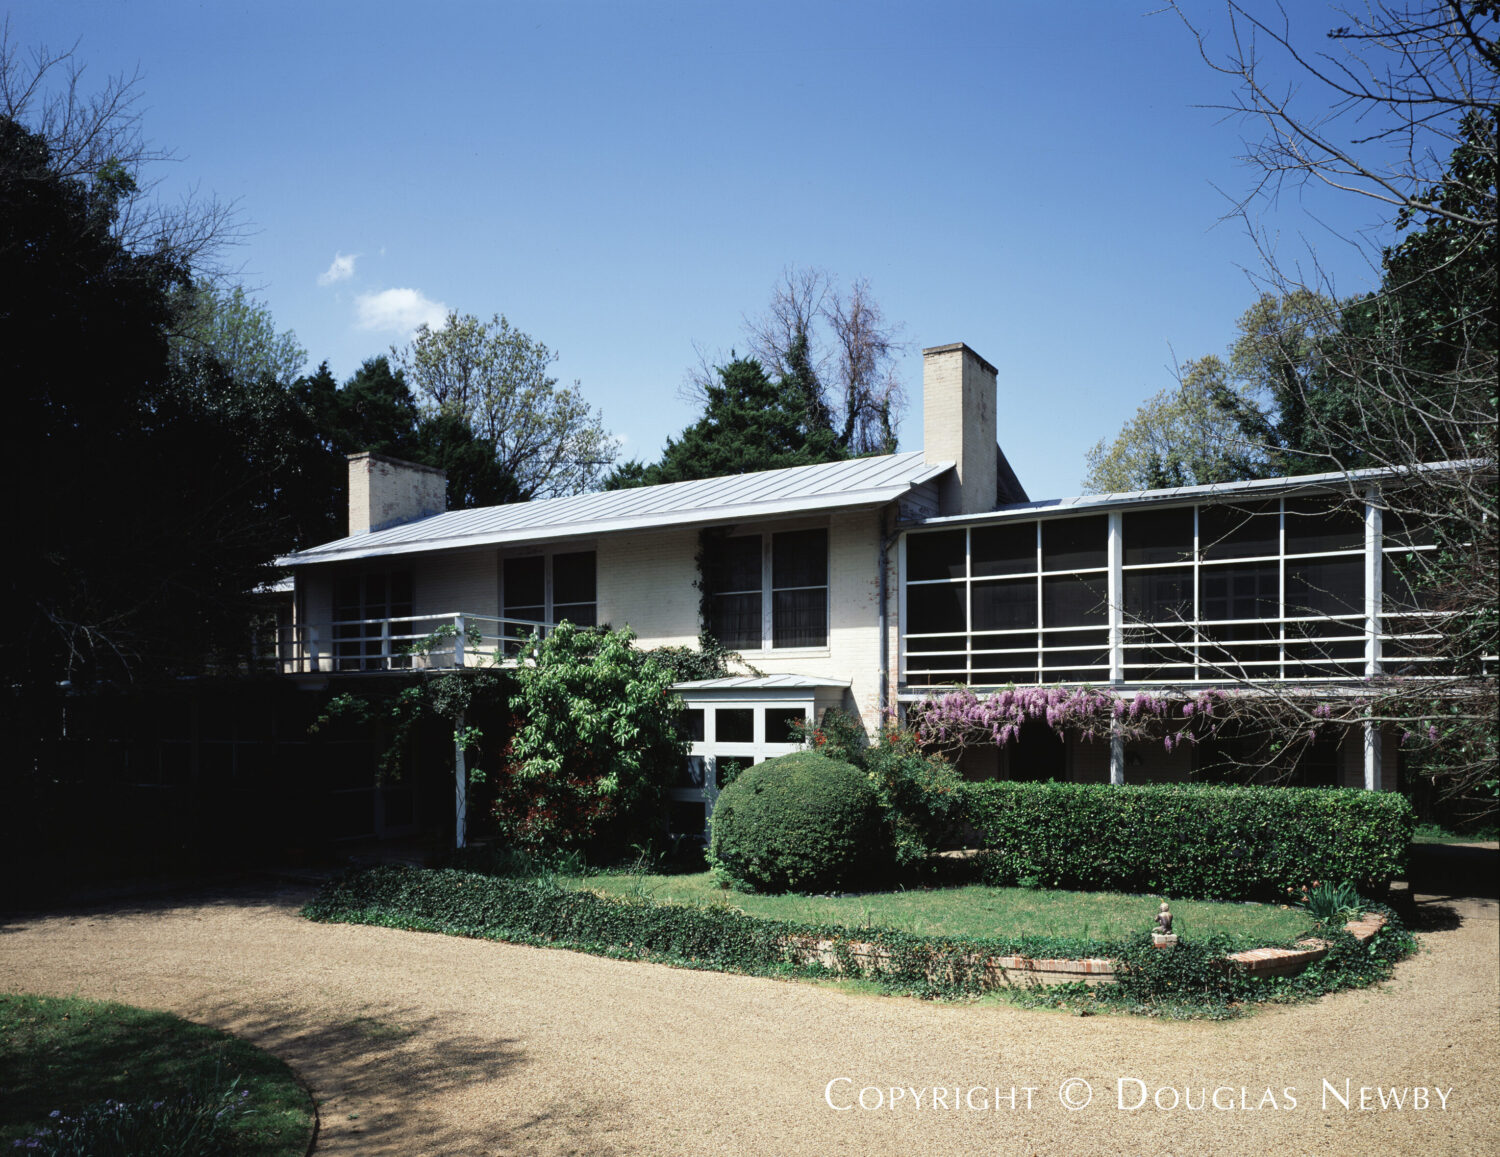 Lakewood home designed by architect Arch Swank and architect O’Neil Ford found in the Dallas neighborhood of Lakewood.